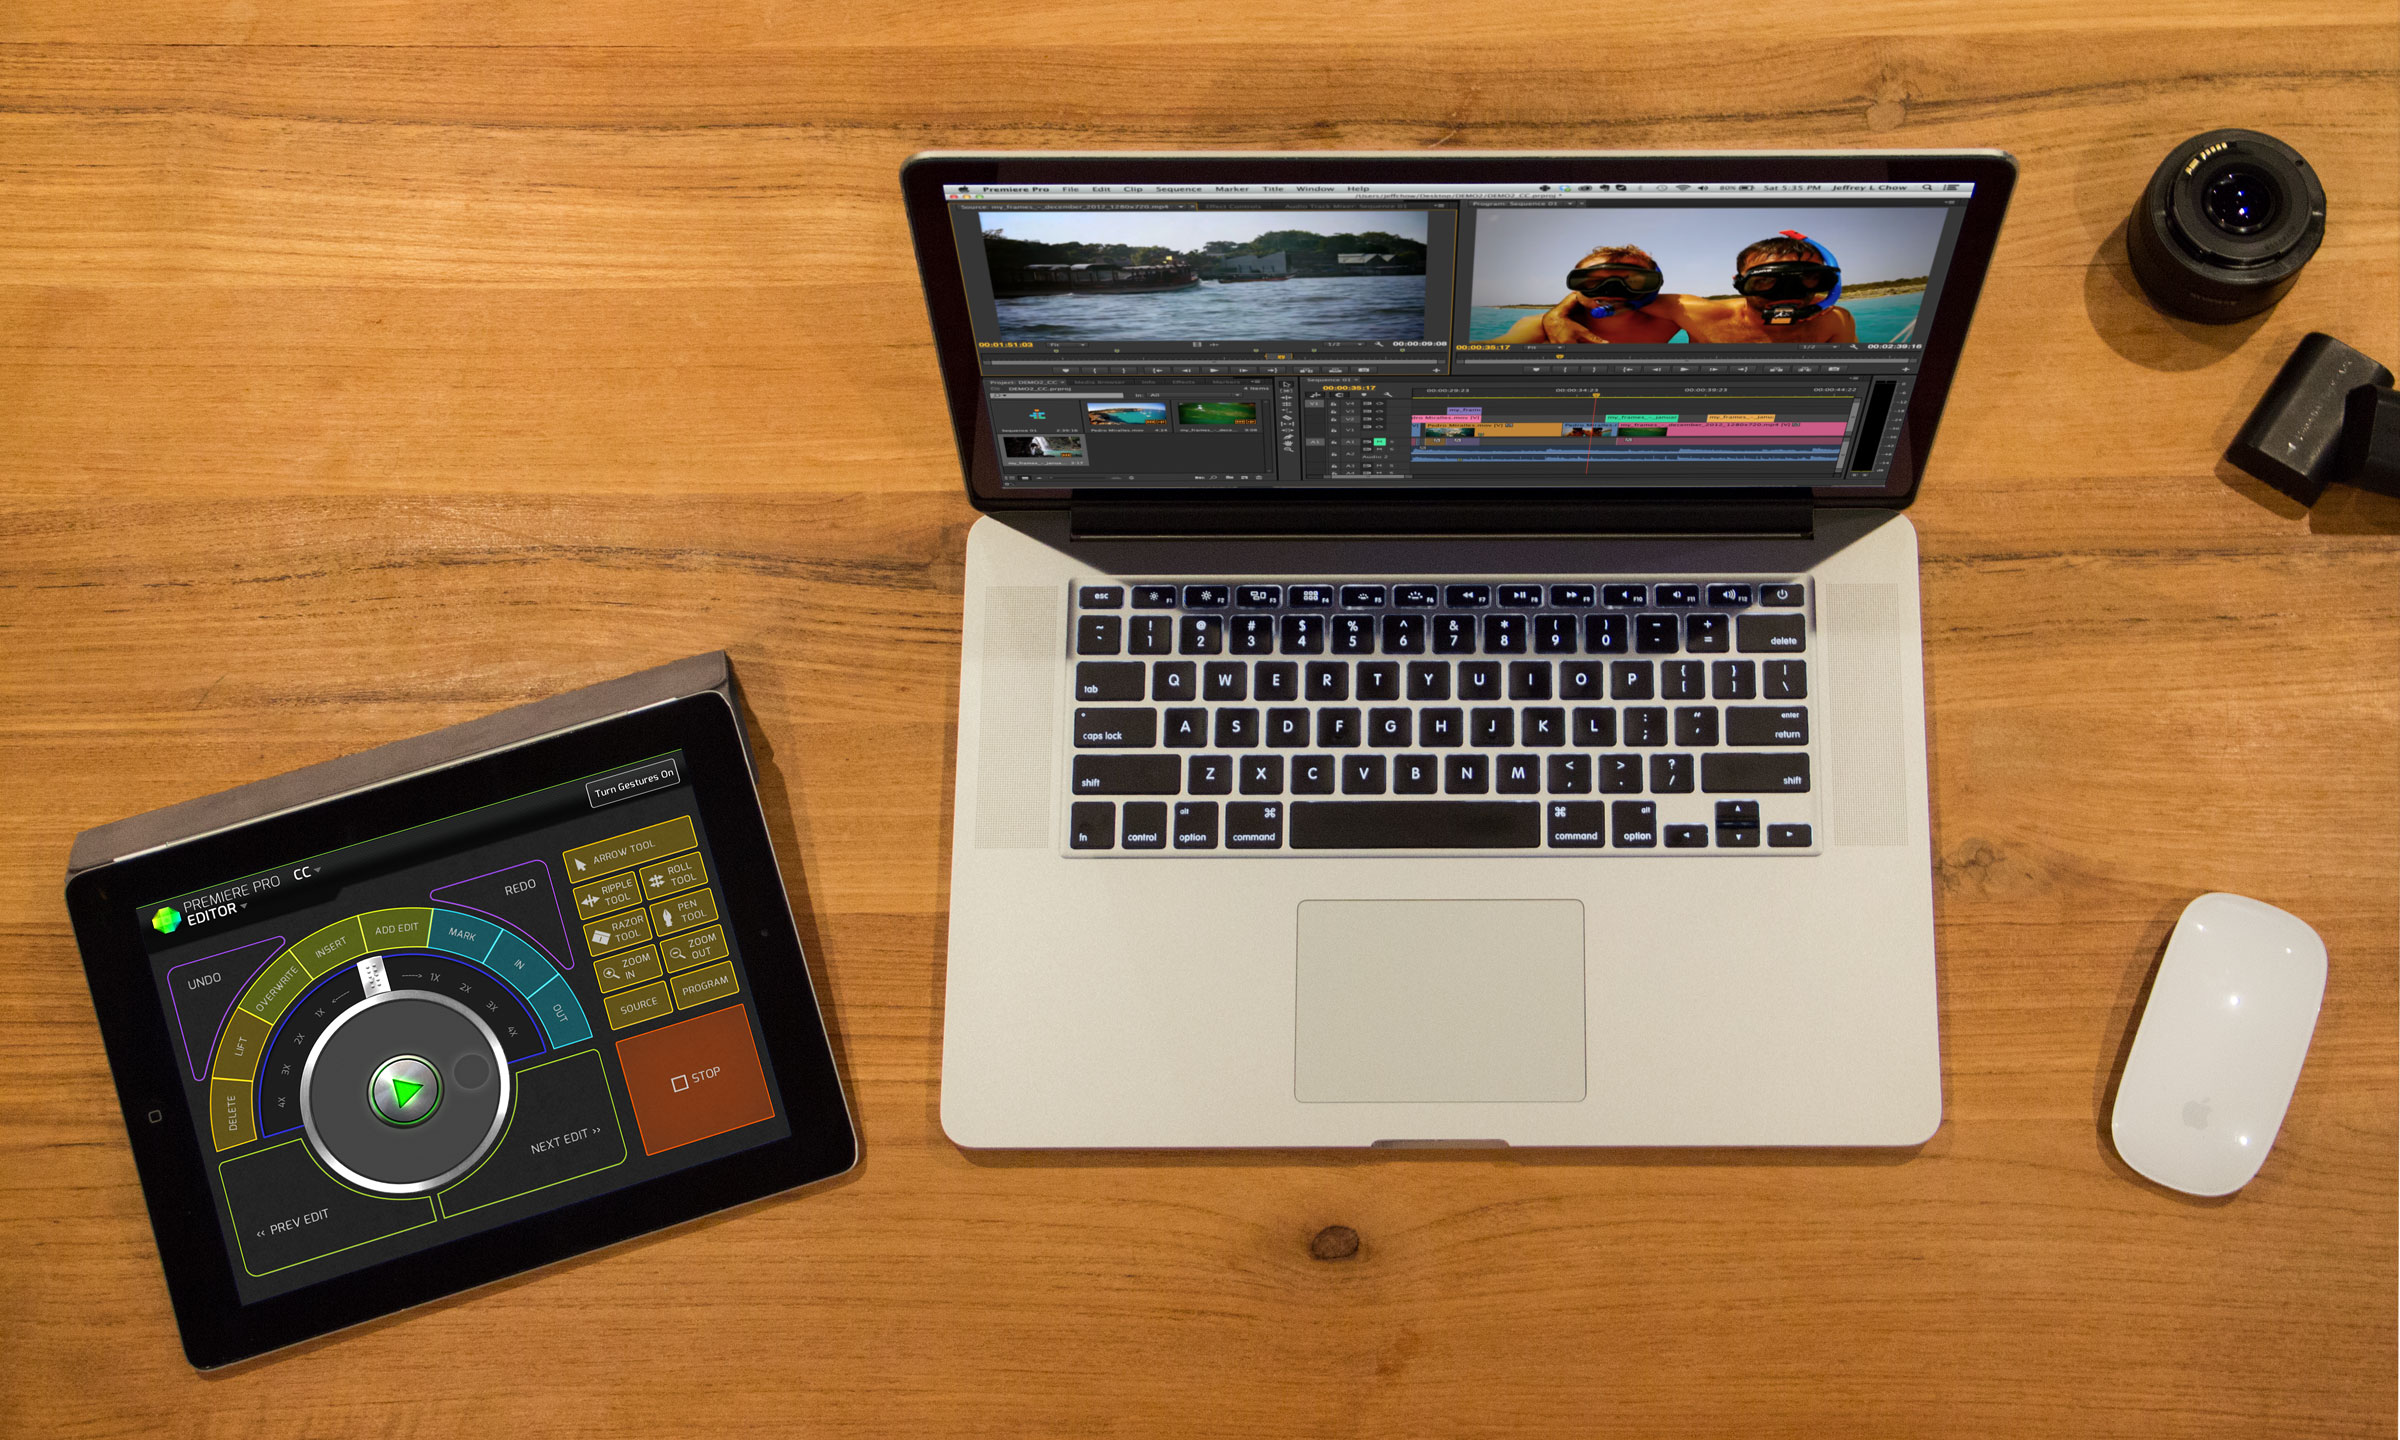 Control your laptop or desktop with your iPad